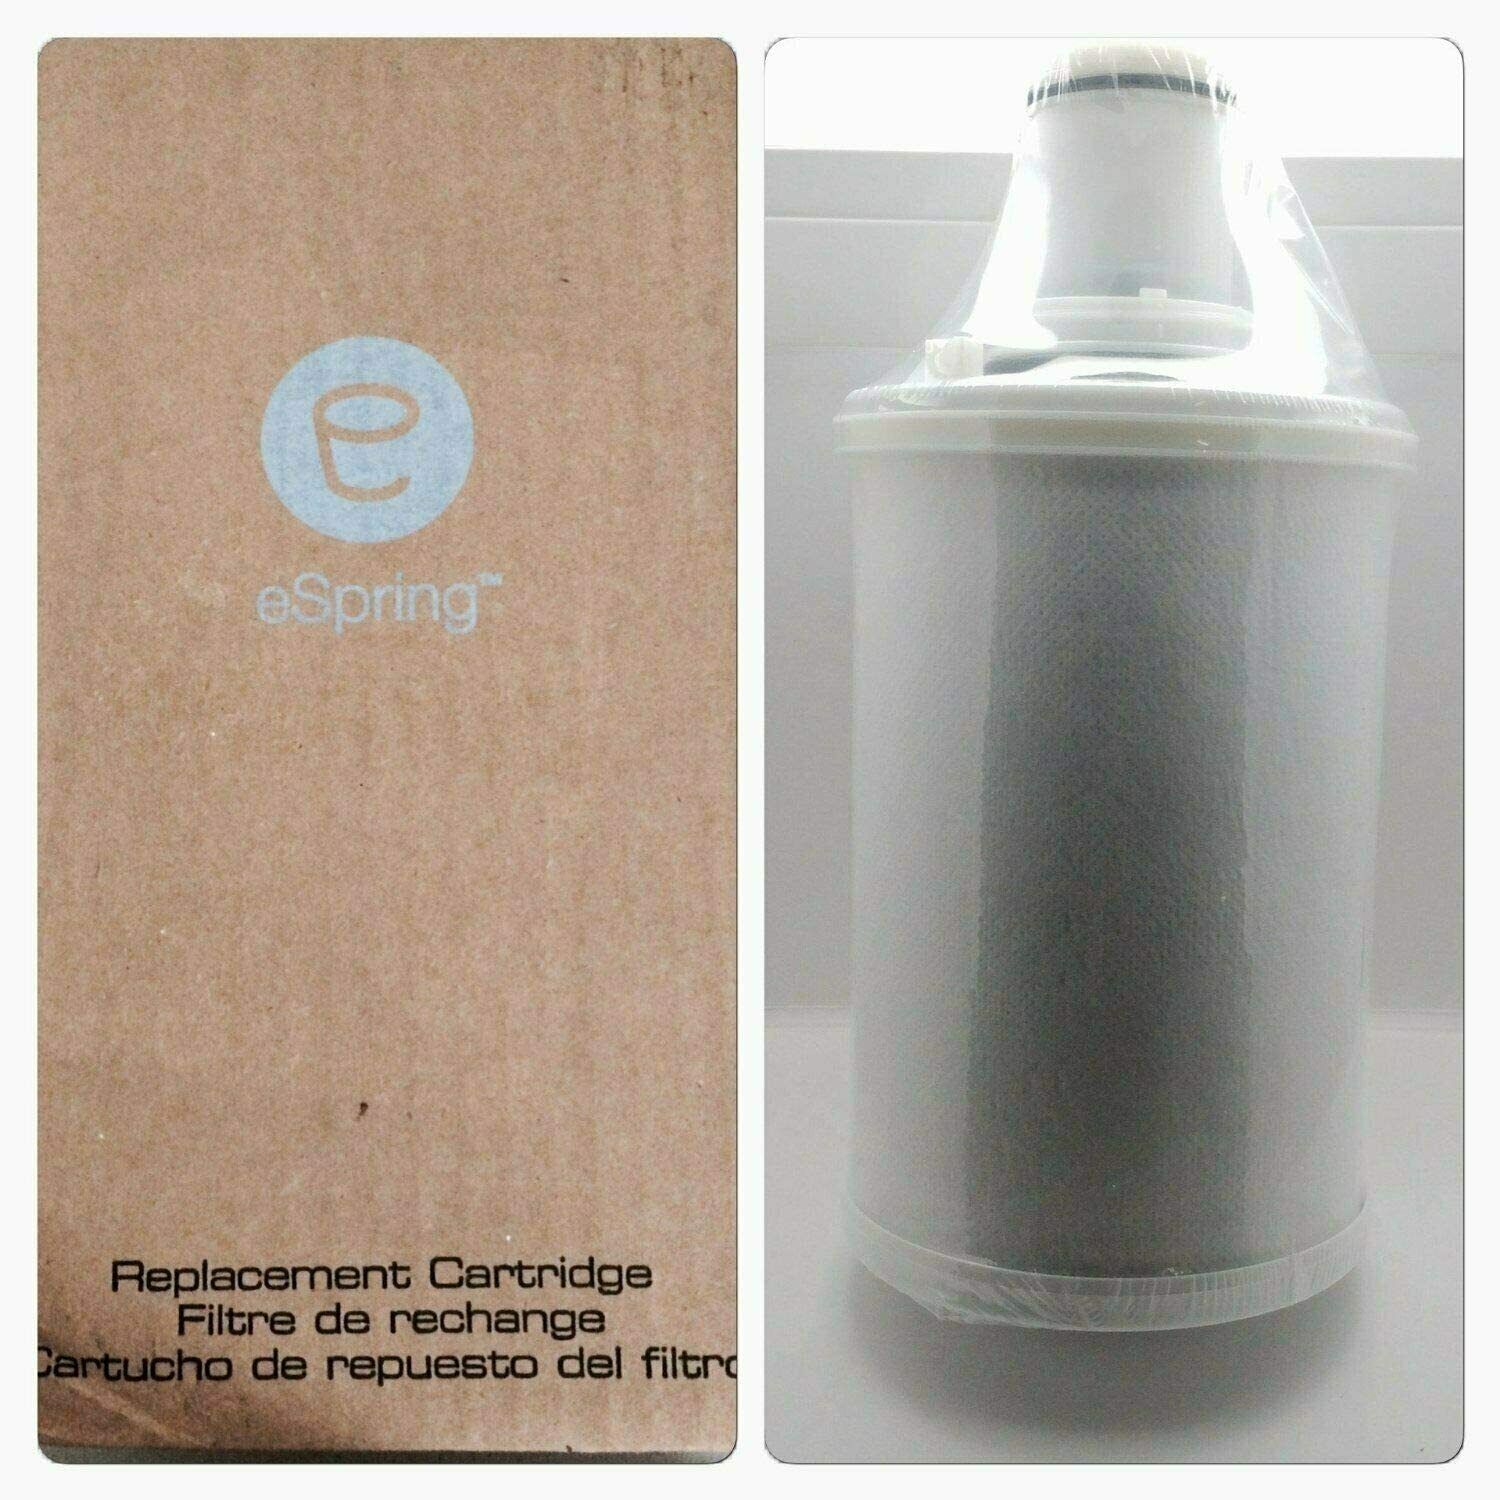 Espring Water Purifier Replacement Filter Cartridge Uv Technology 100186 Amway